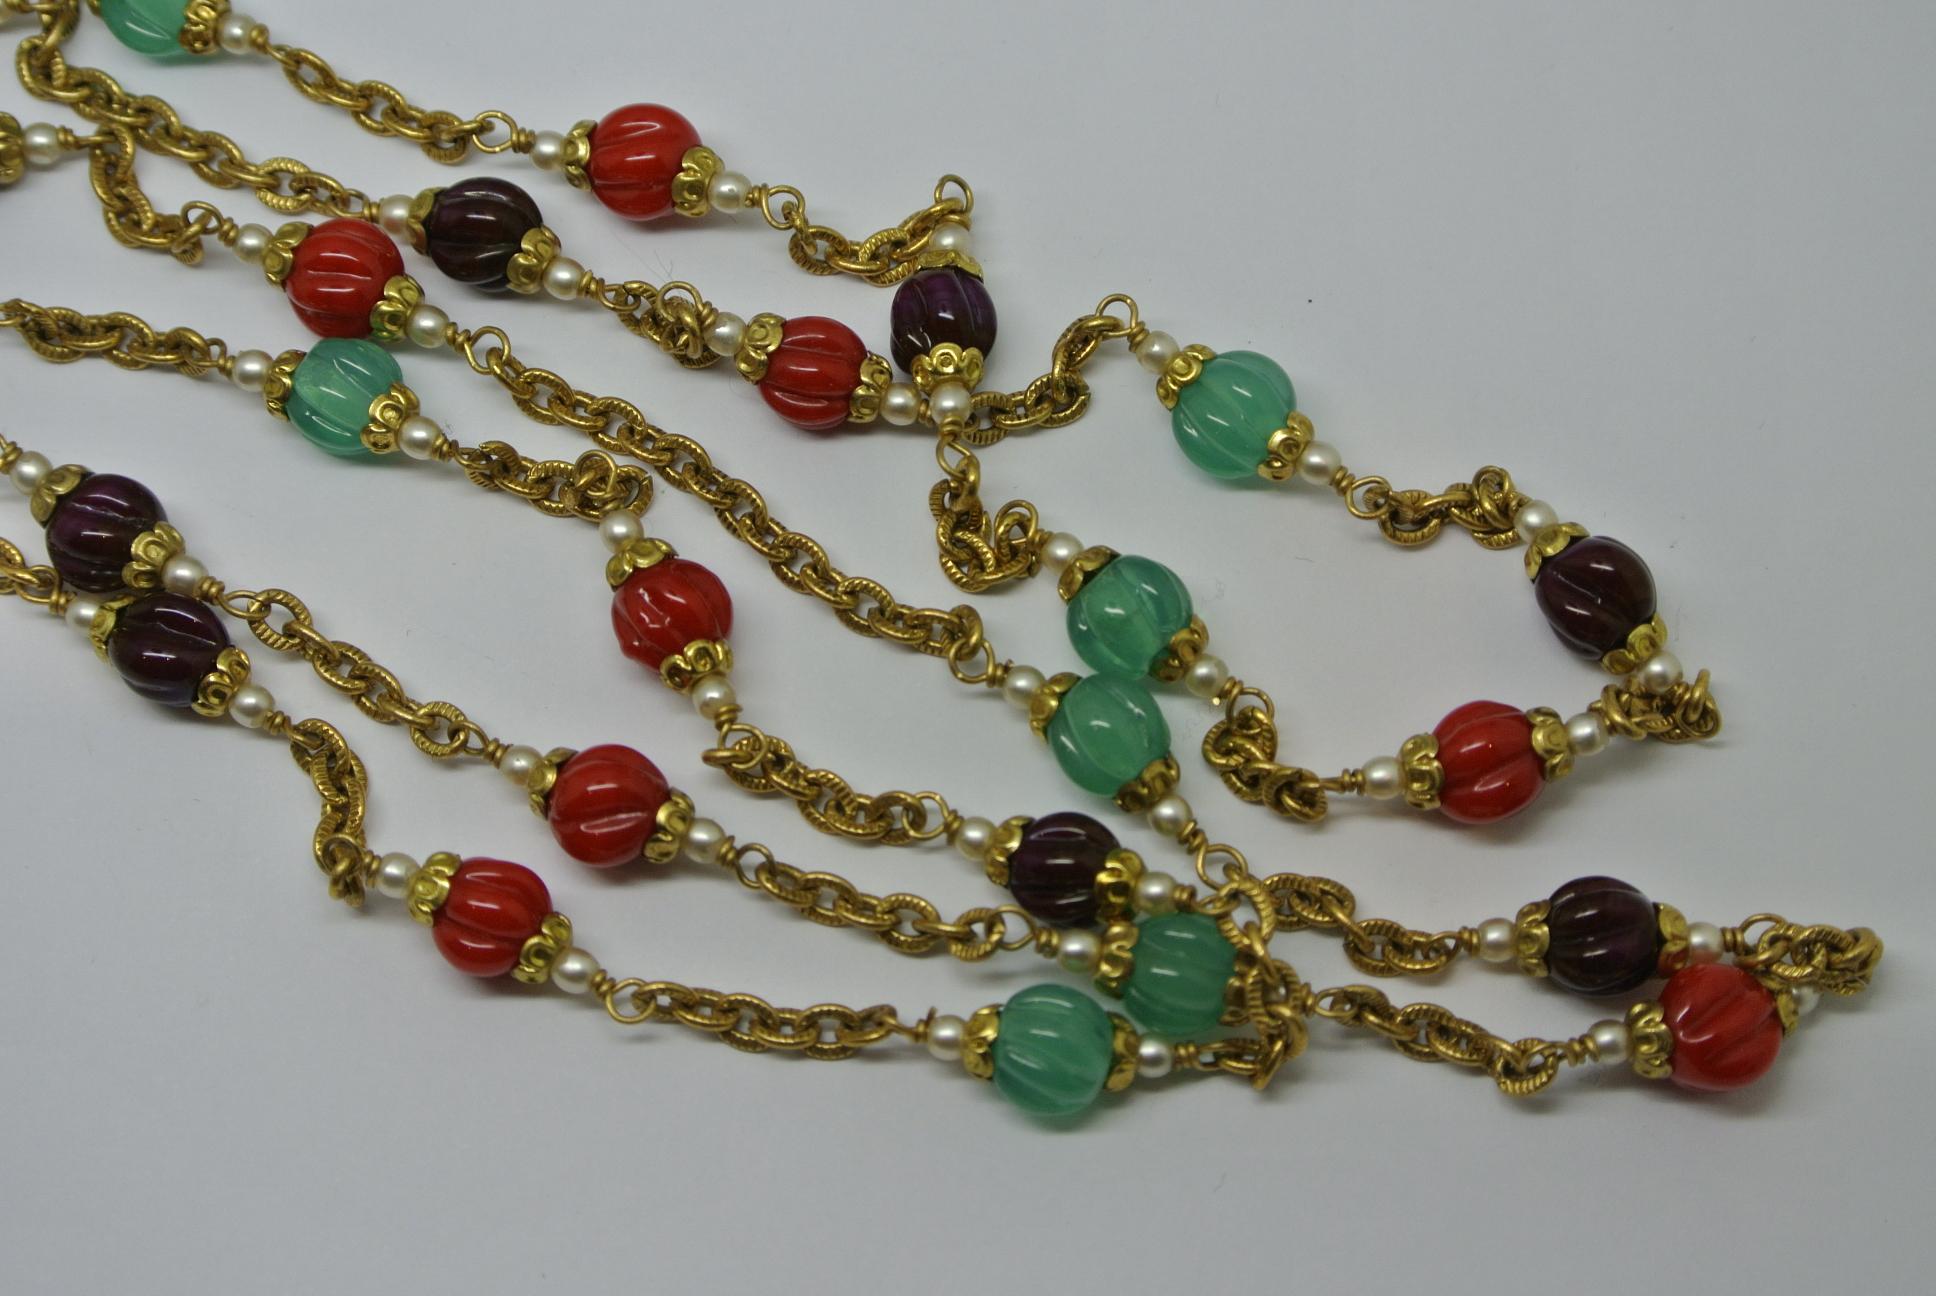 Chanel necklace
small size poured glass beads
Dated 1980s